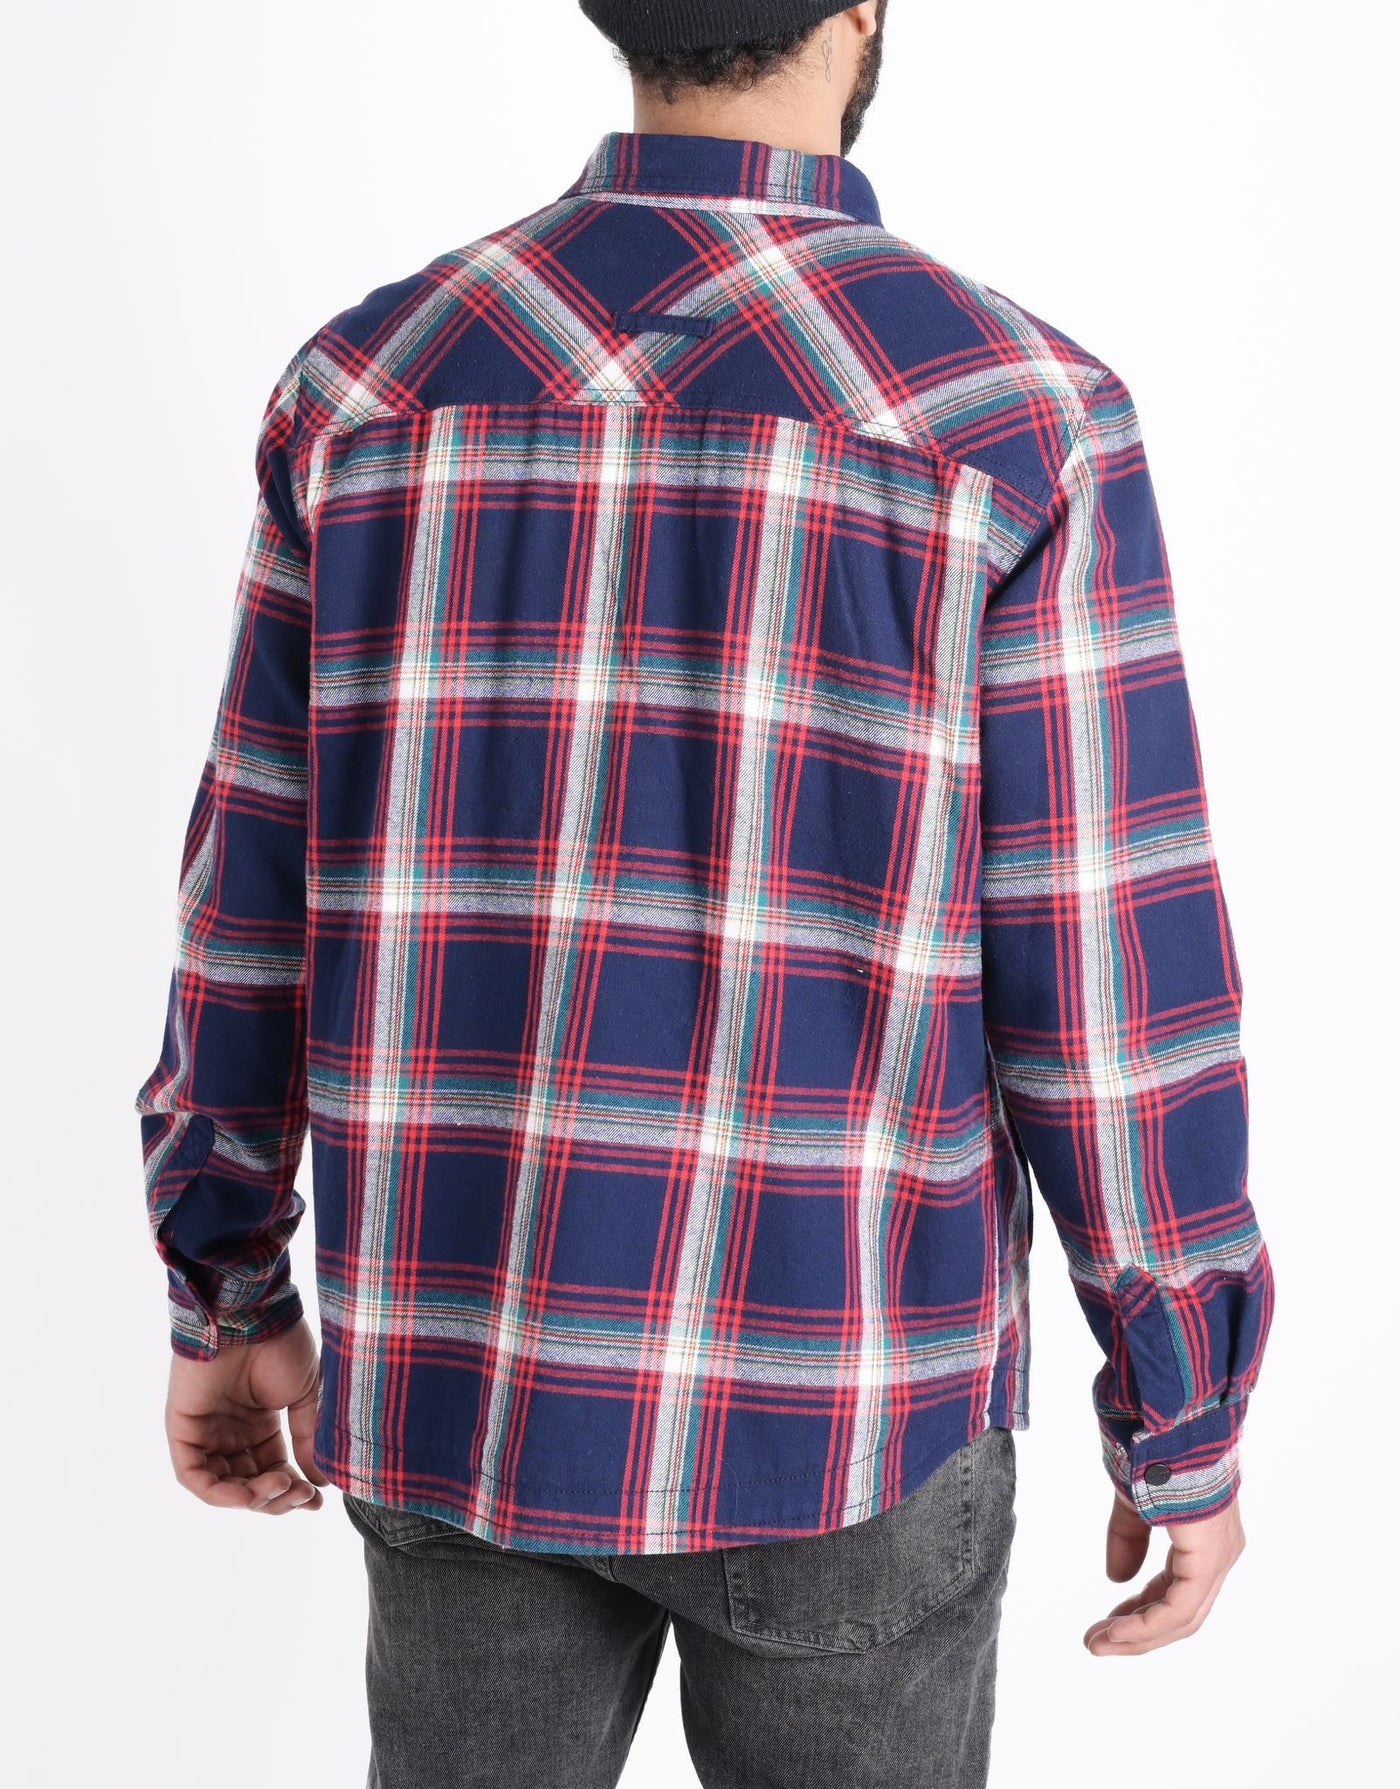 687-2106 Sherpa Lined 100% Cotton Flannel Shirt Jacket Blue/Red